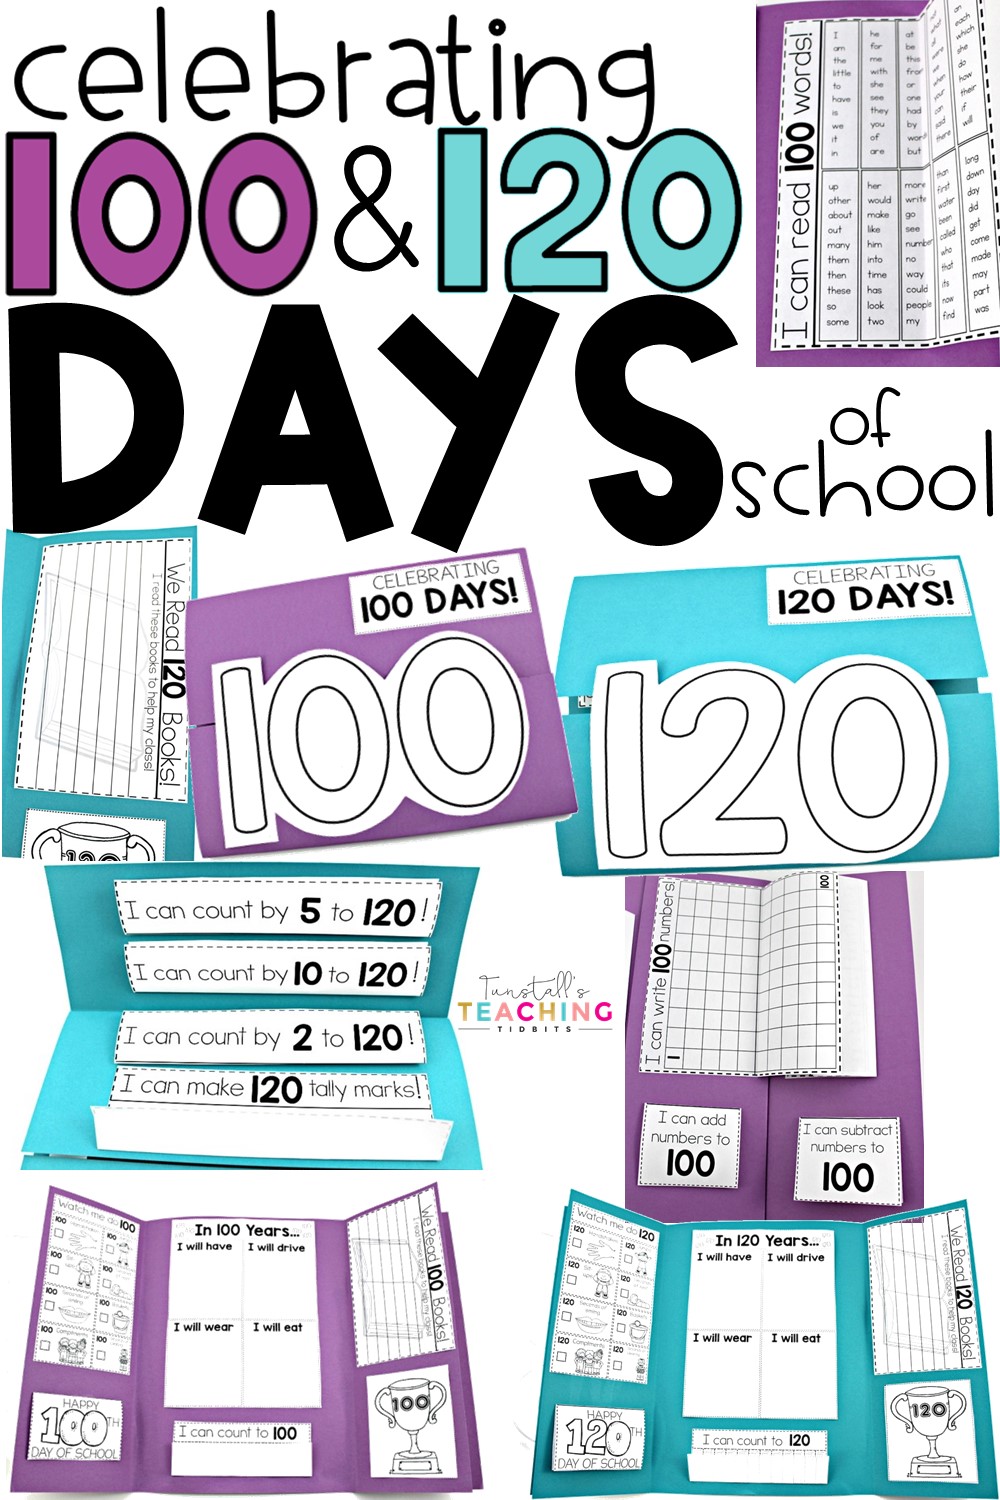 Celebrating the 100th Day (or 120th)